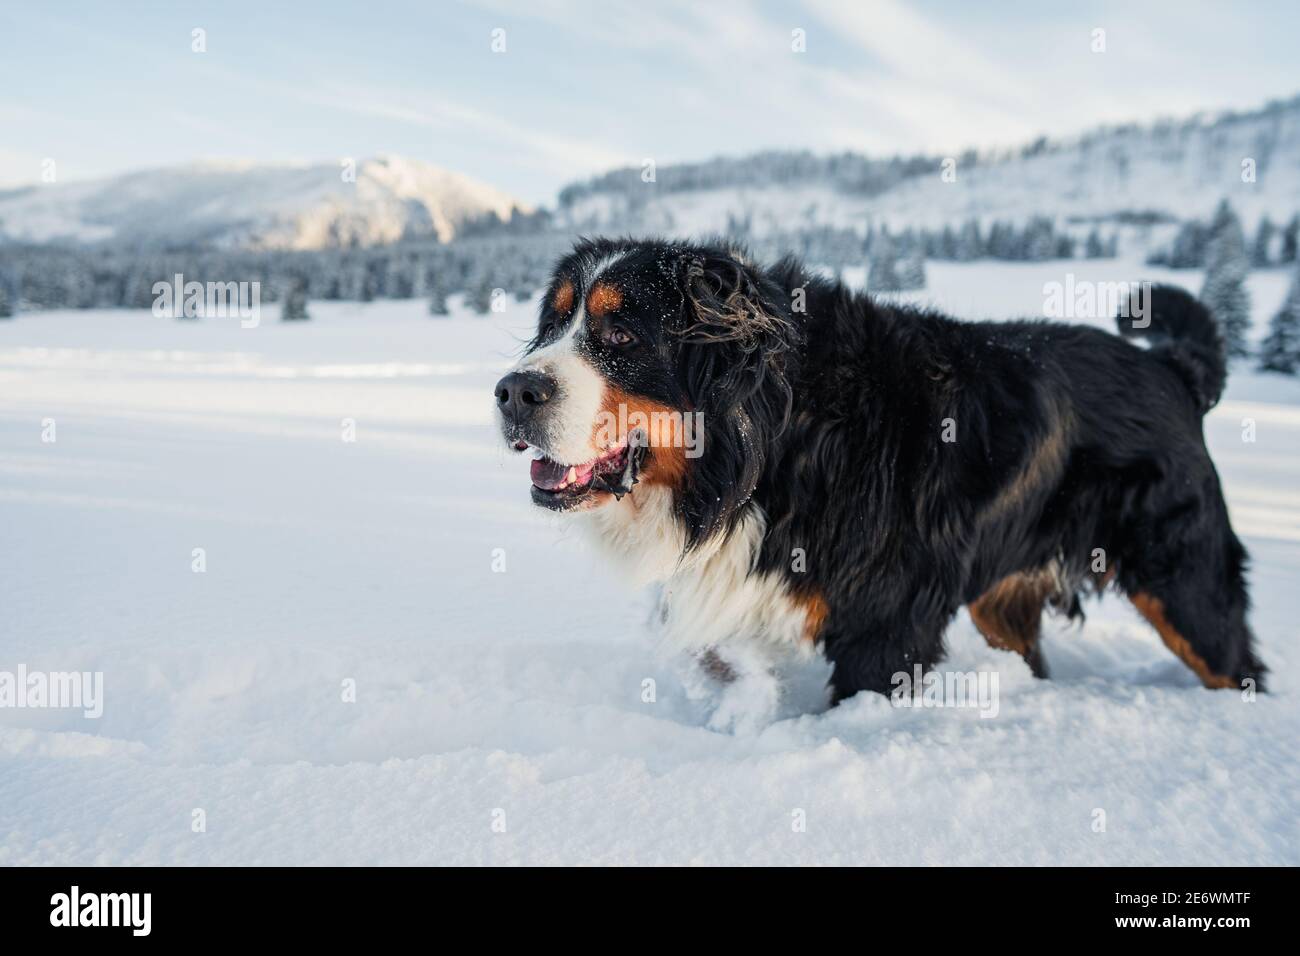 Bernese mountain dog with snow on winter snowy weather. Funny pet Stock Photo